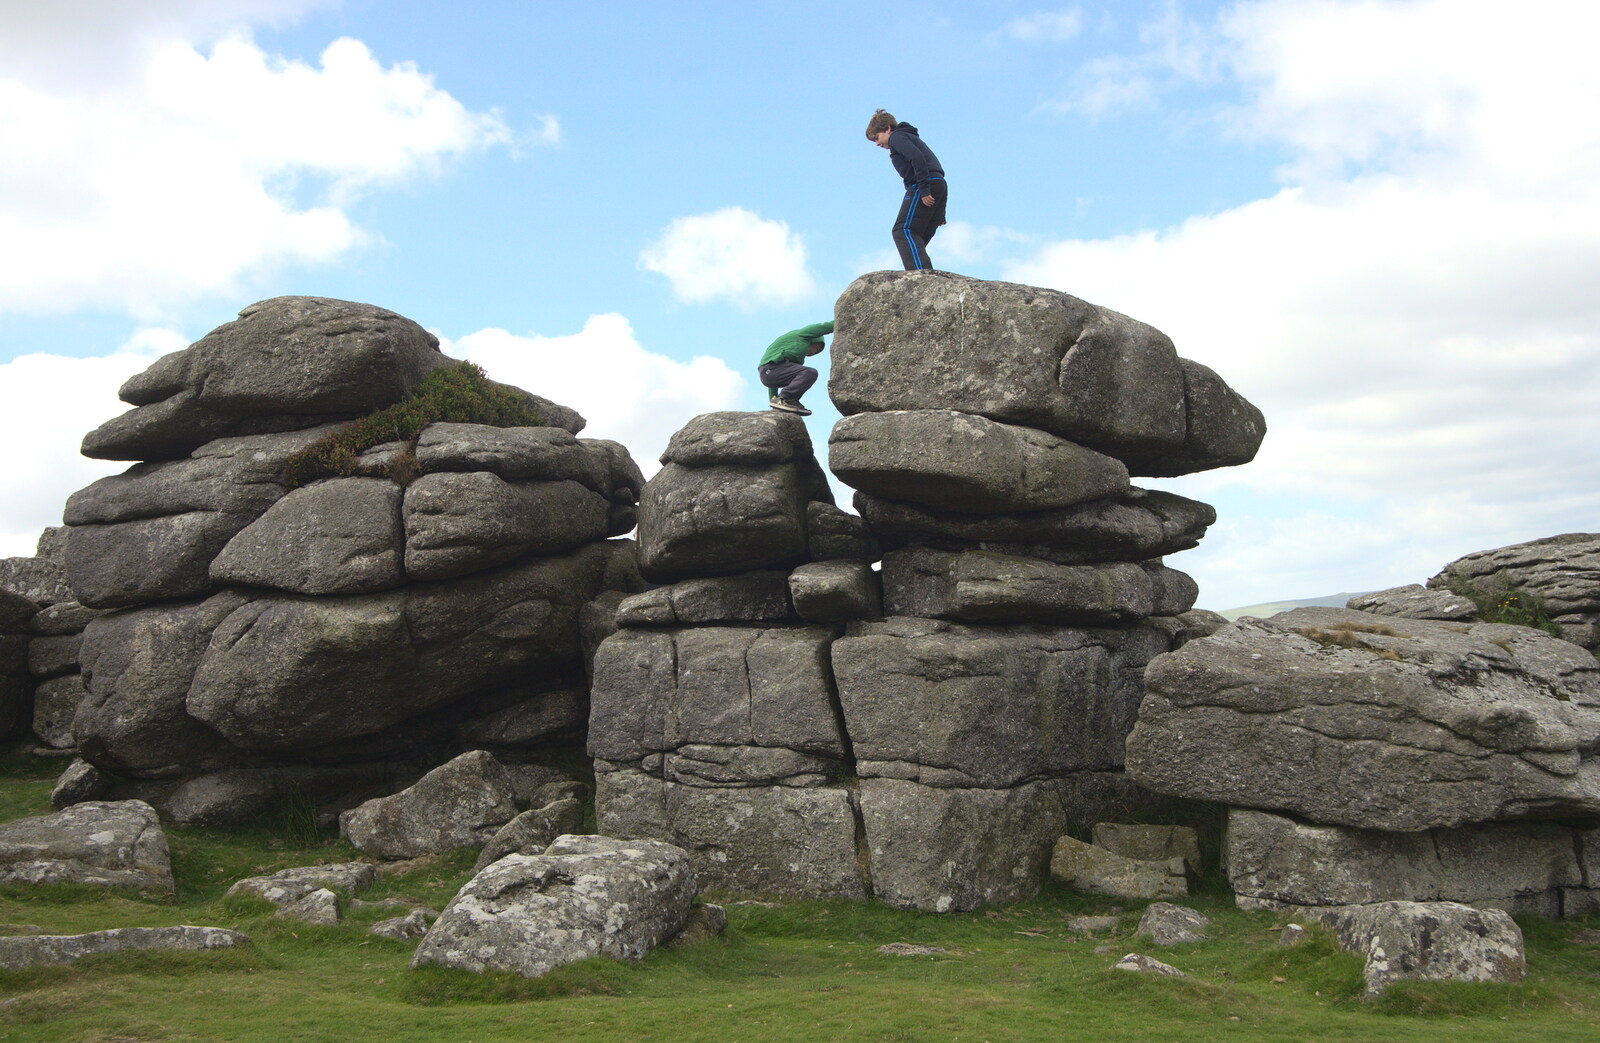 Fred and Rowan on top of the tor from Badger's Holt and Bronze-Age Grimspound, Dartmoor, Devon - 10th August 2016